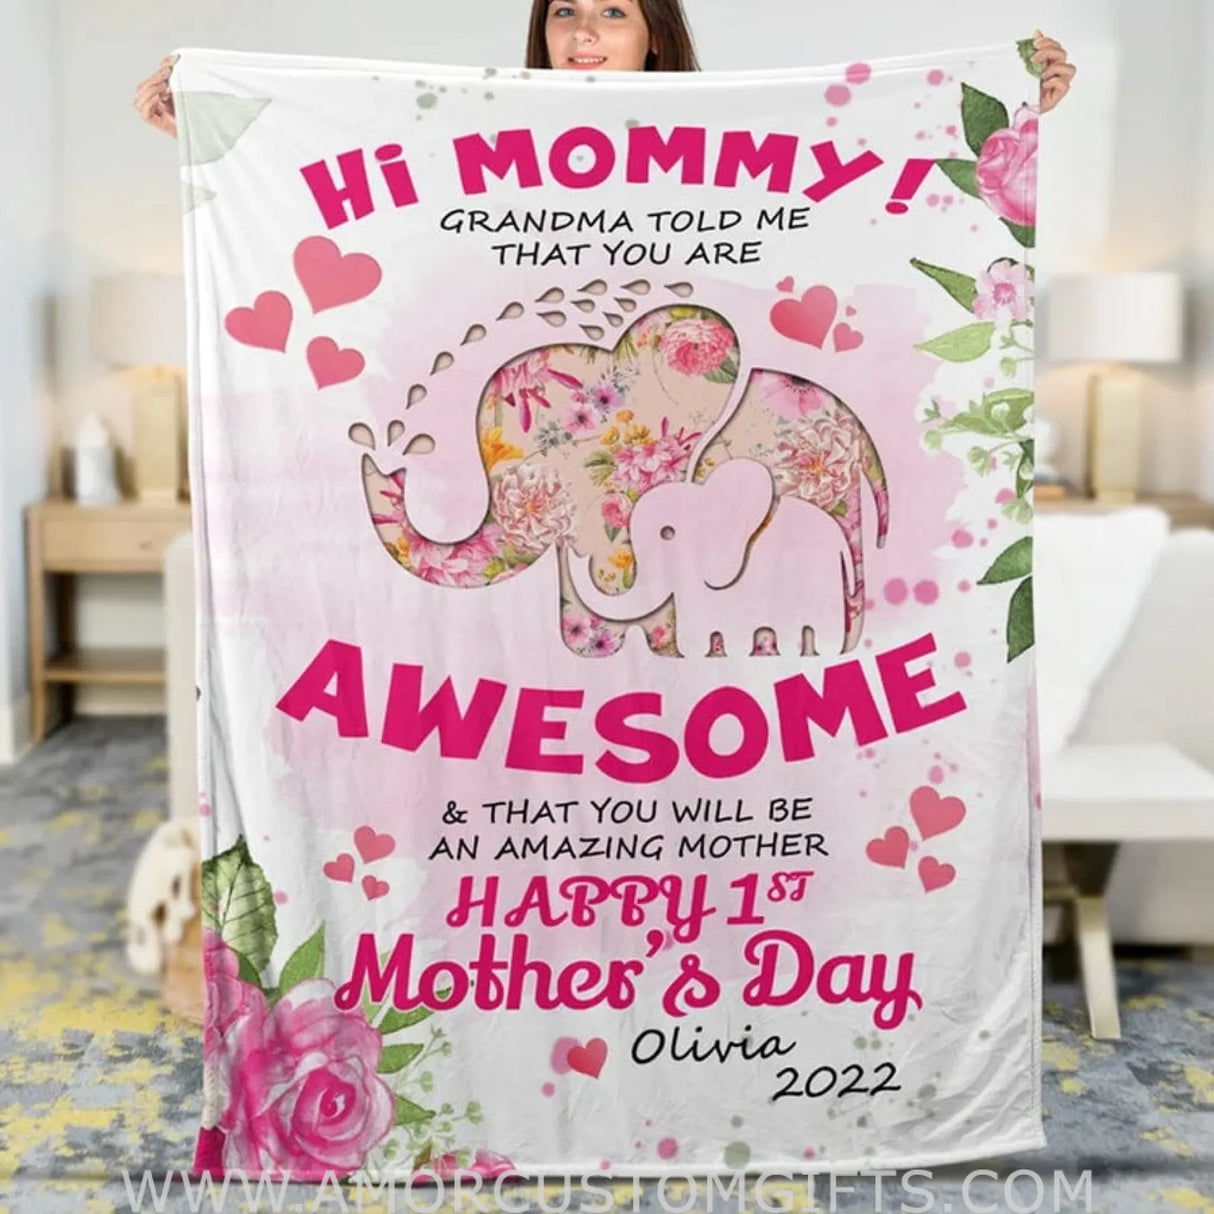 Blanket To My Mommy I Love You, Happy Mother's Day Blanket - Mother's Day Blanket